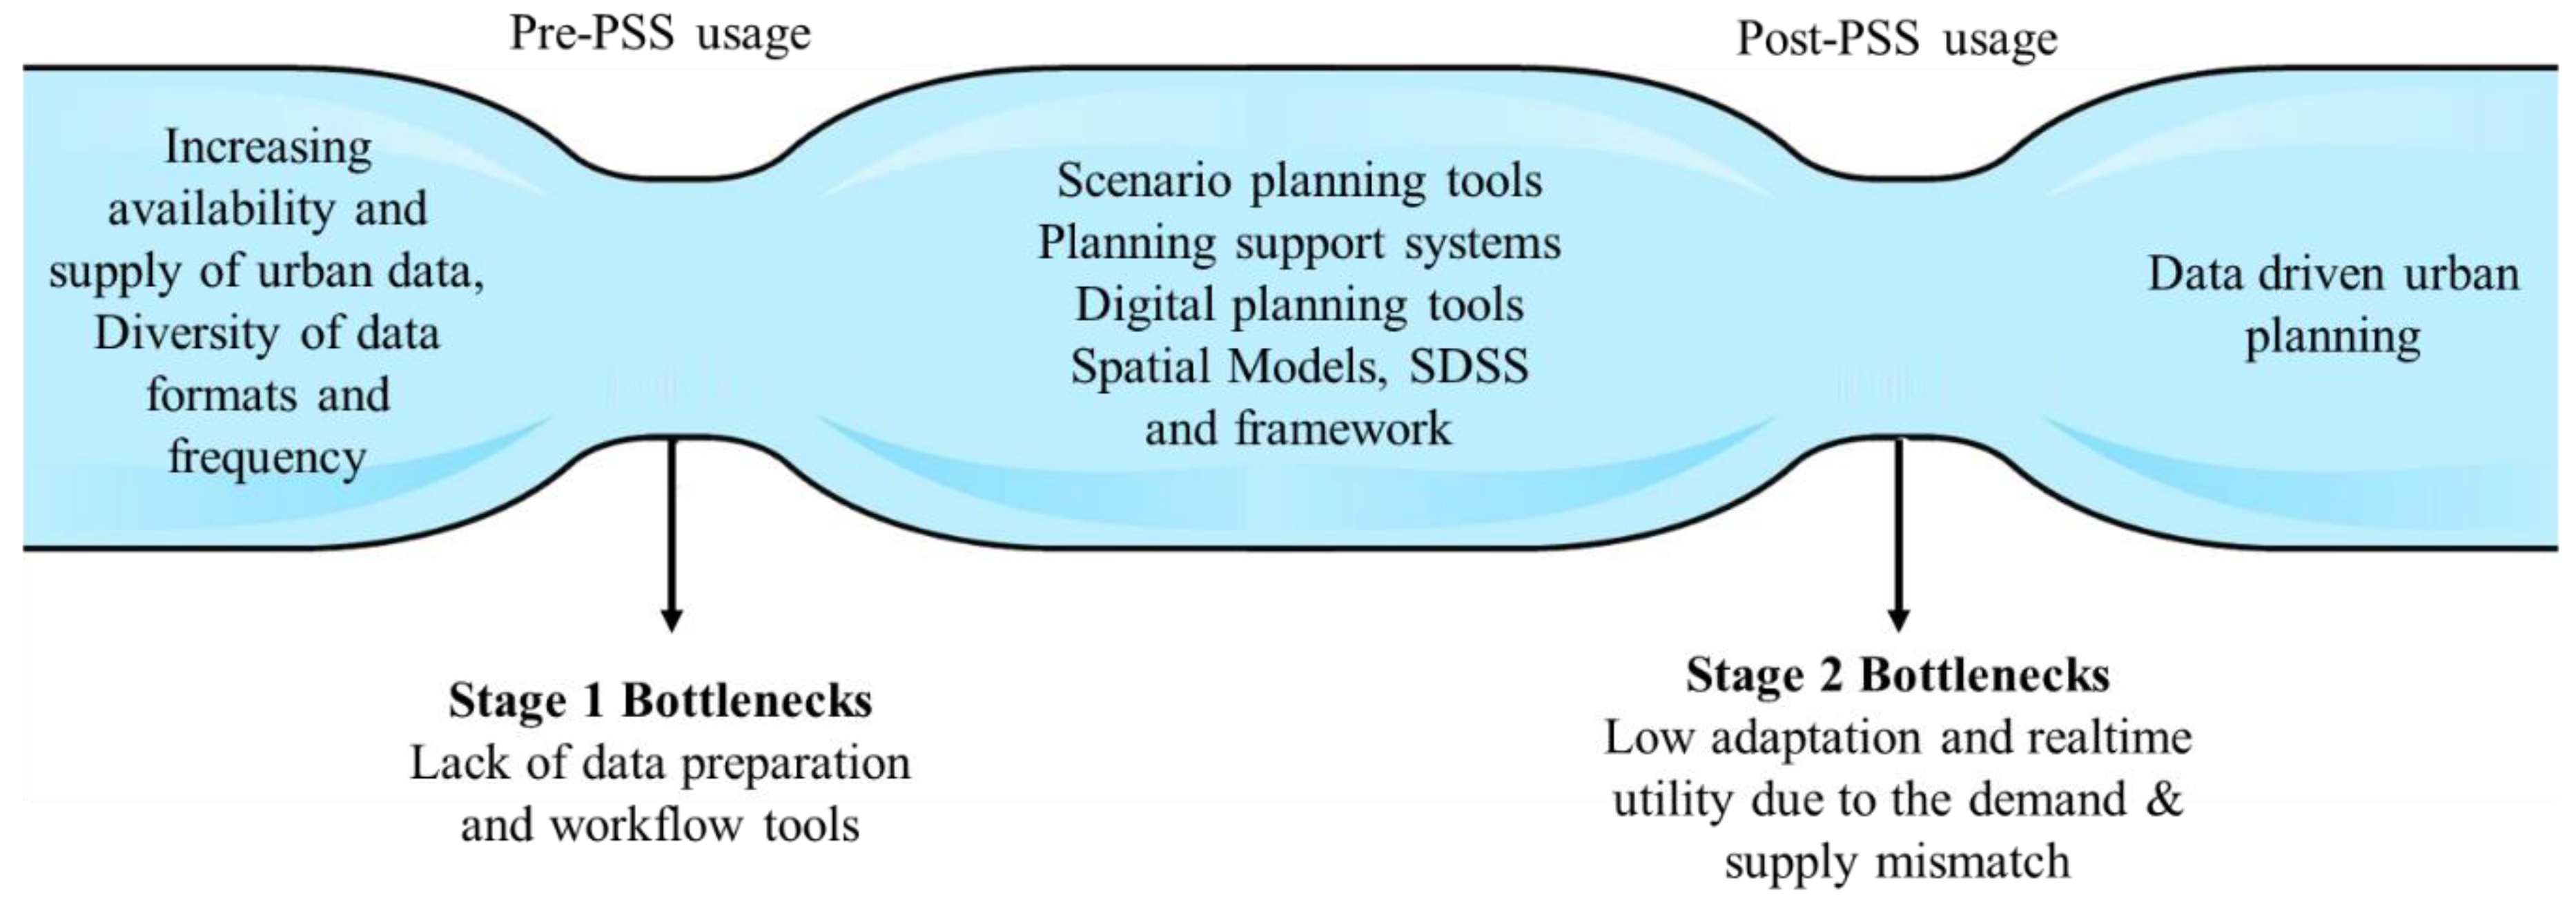 Ijgi Free Full Text Evaluating A Workflow Tool For Simplifying Scenario Planning With The Online Whatif Planning Support System